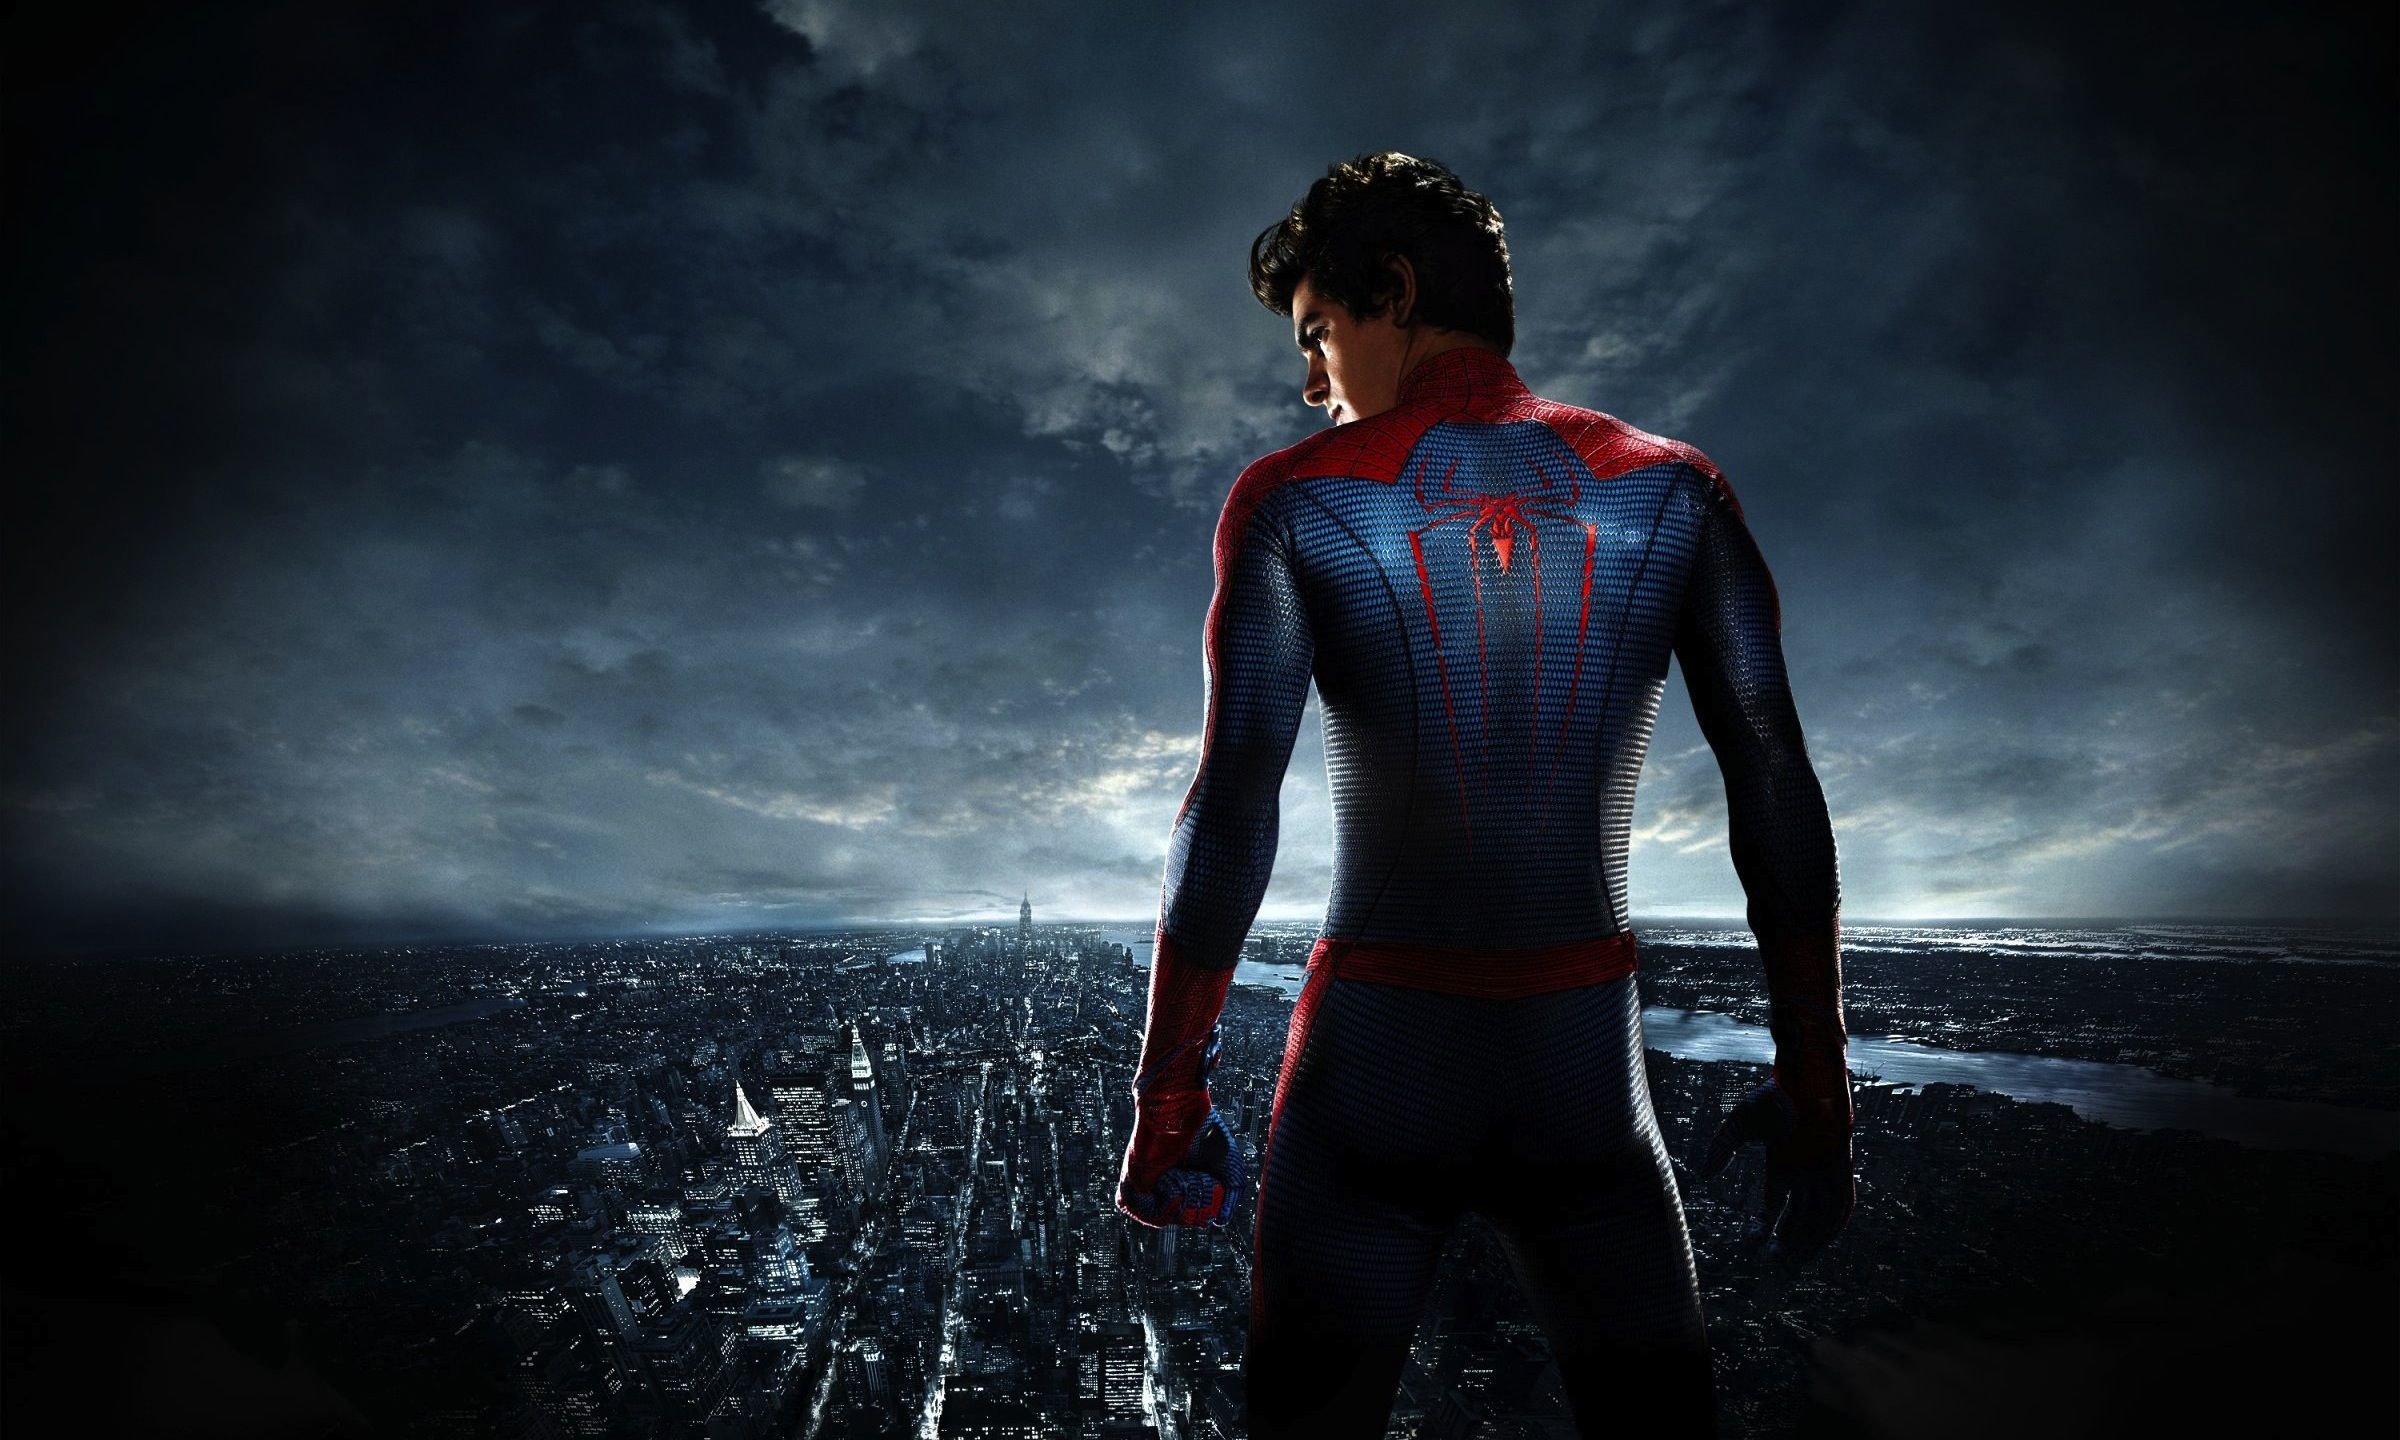 2400x1440 Awesome Spiderman Computer Wallpapers, Desktop Backgrounds | 398.79 KB | ID  742746